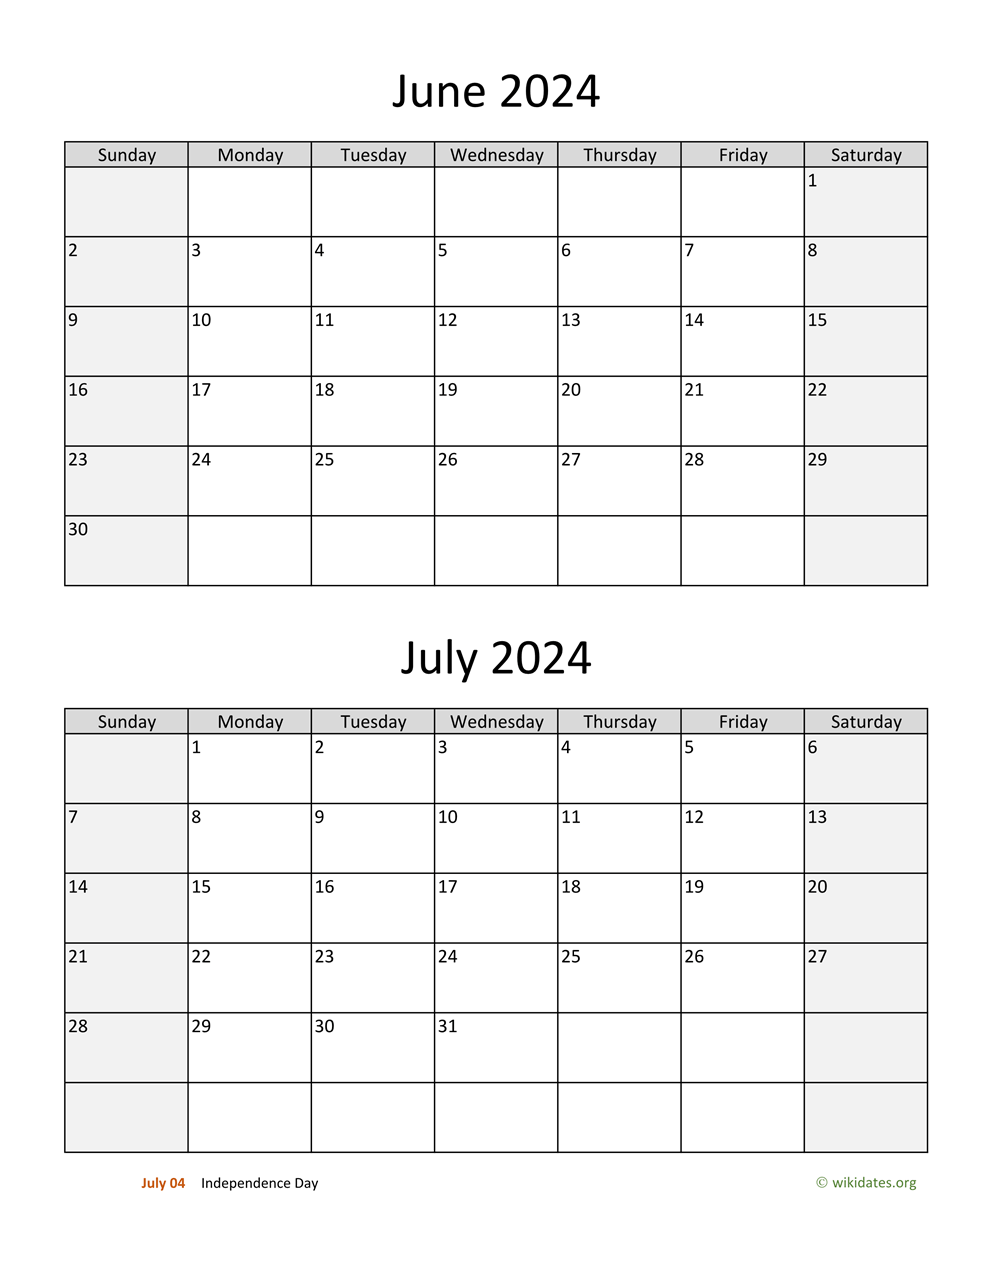 June And July 2024 Calendar | Wikidates for Printable June And July Calendar 2024